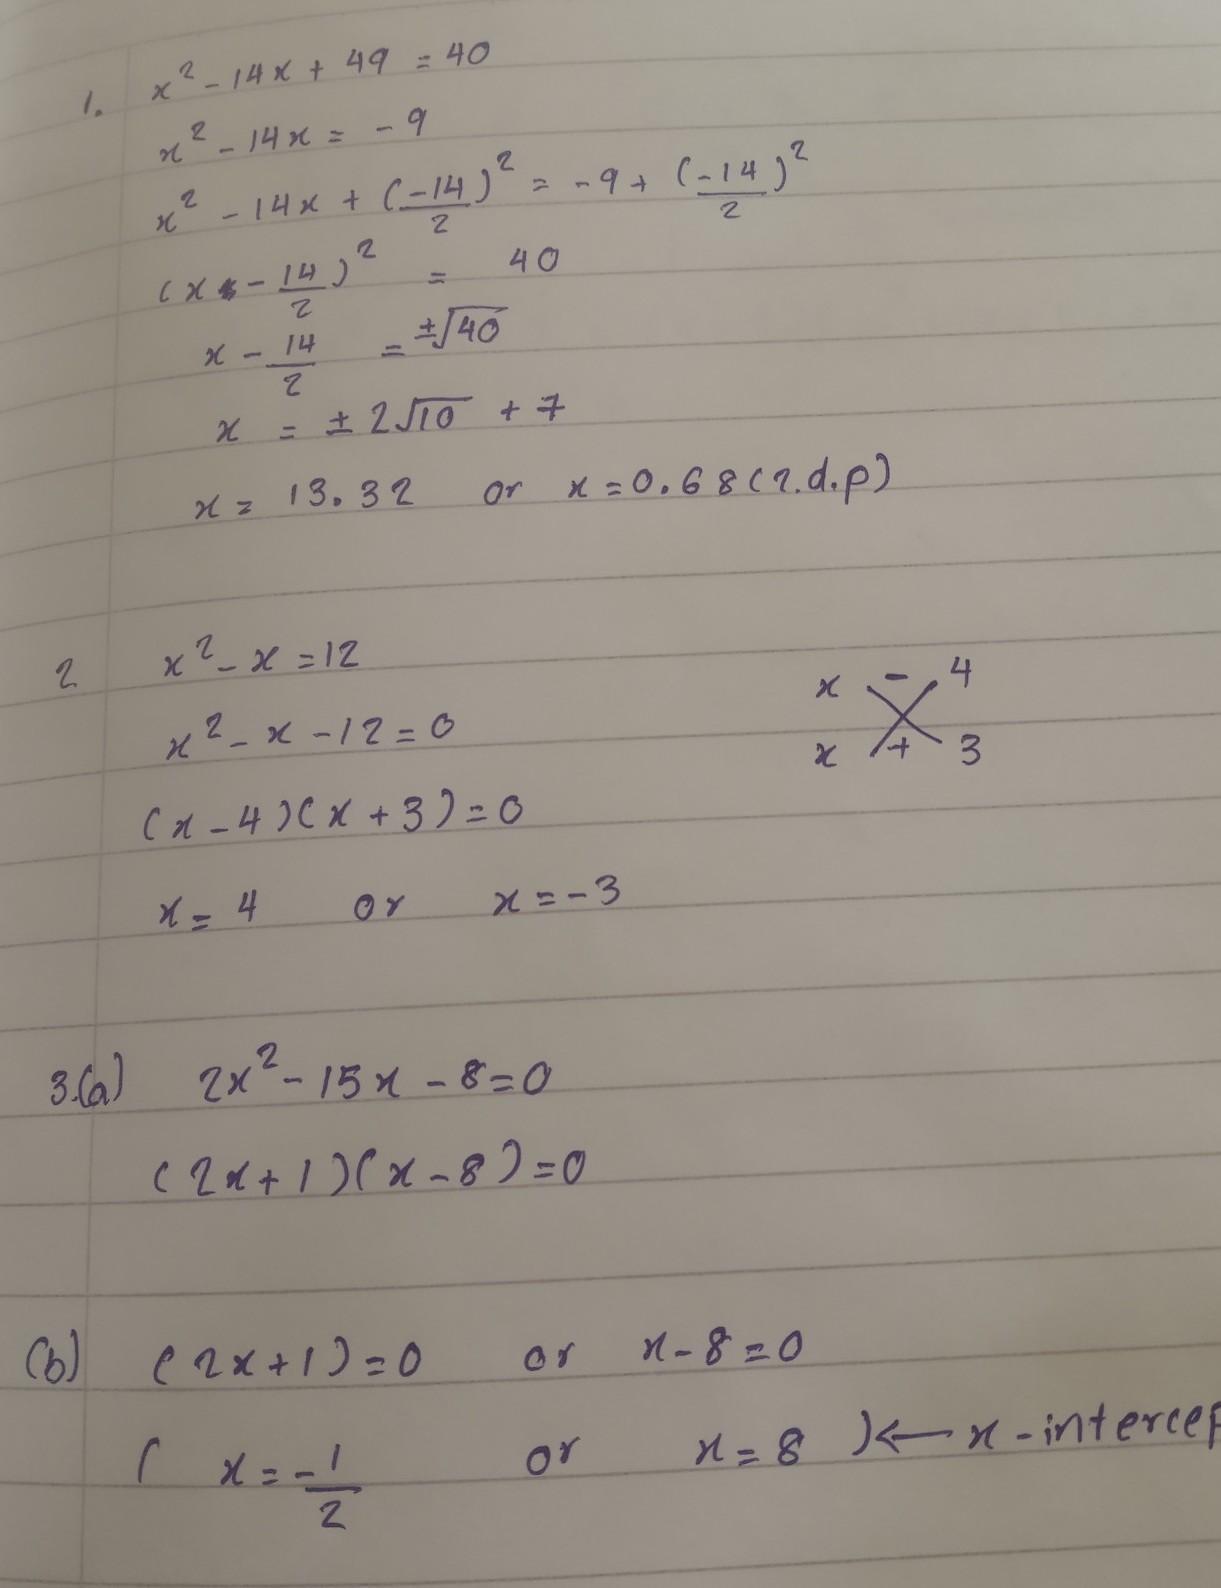 (Solving Quadratic Equations) Hello, I Need Help With Just 3 Questions. Thanks :)